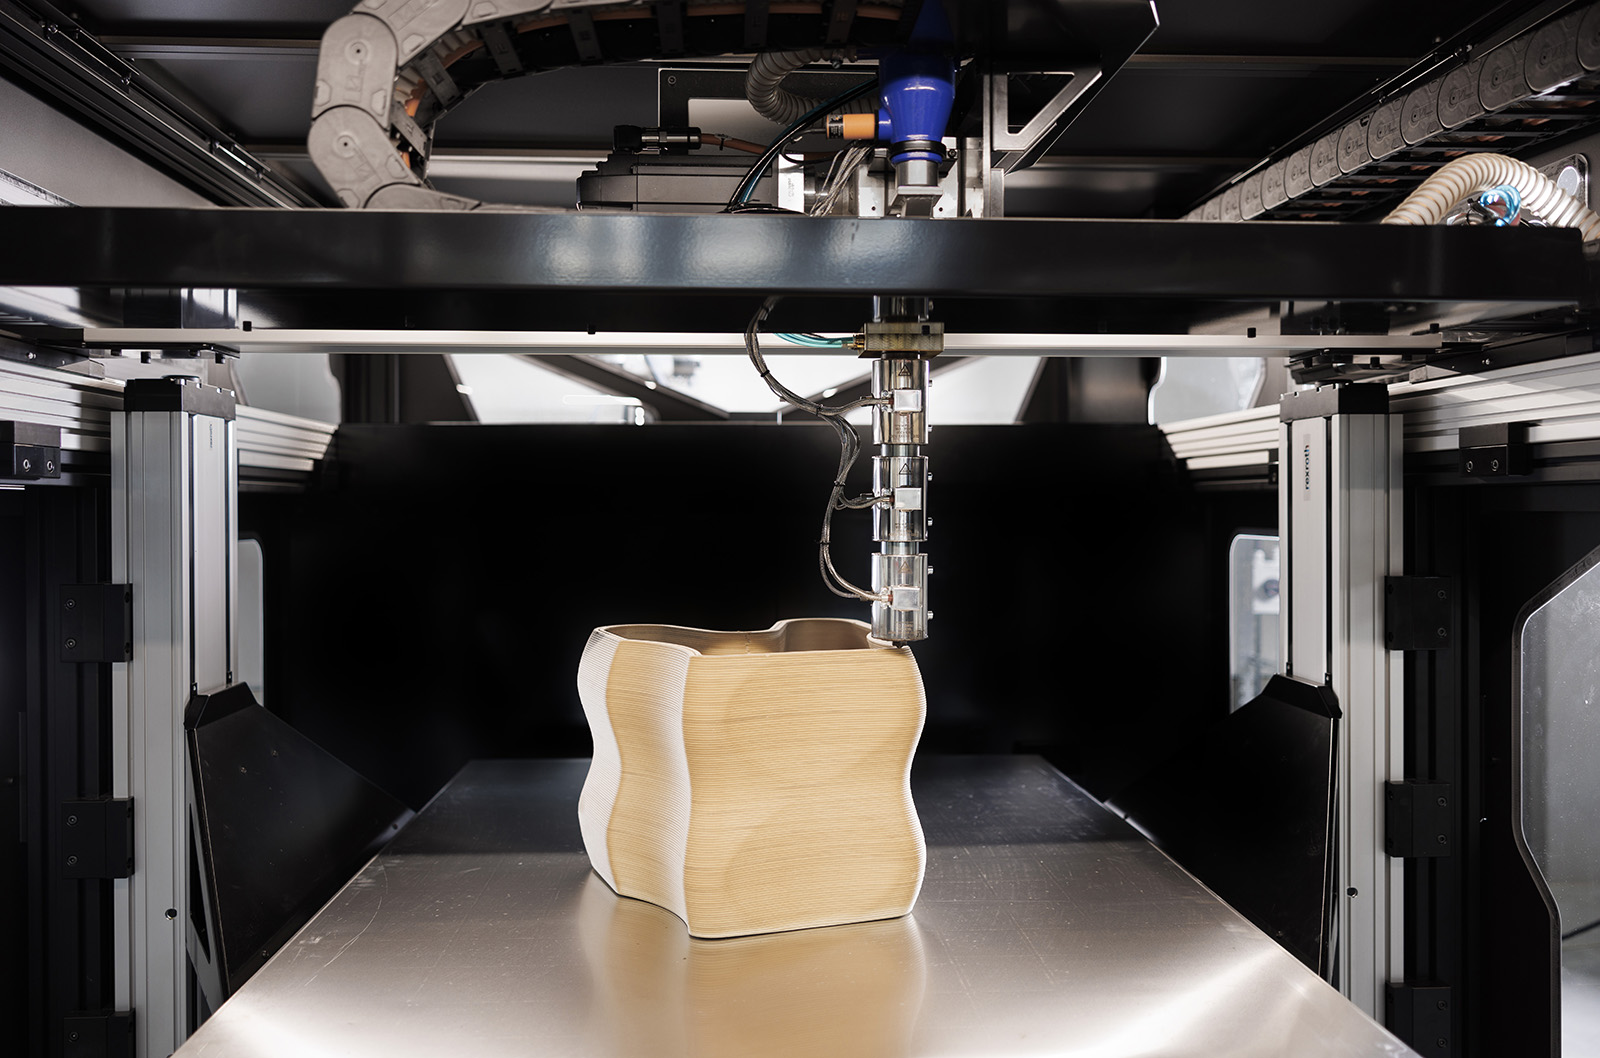 Large-scale 3D printers for additive manufacturing: design considerations  and challenges